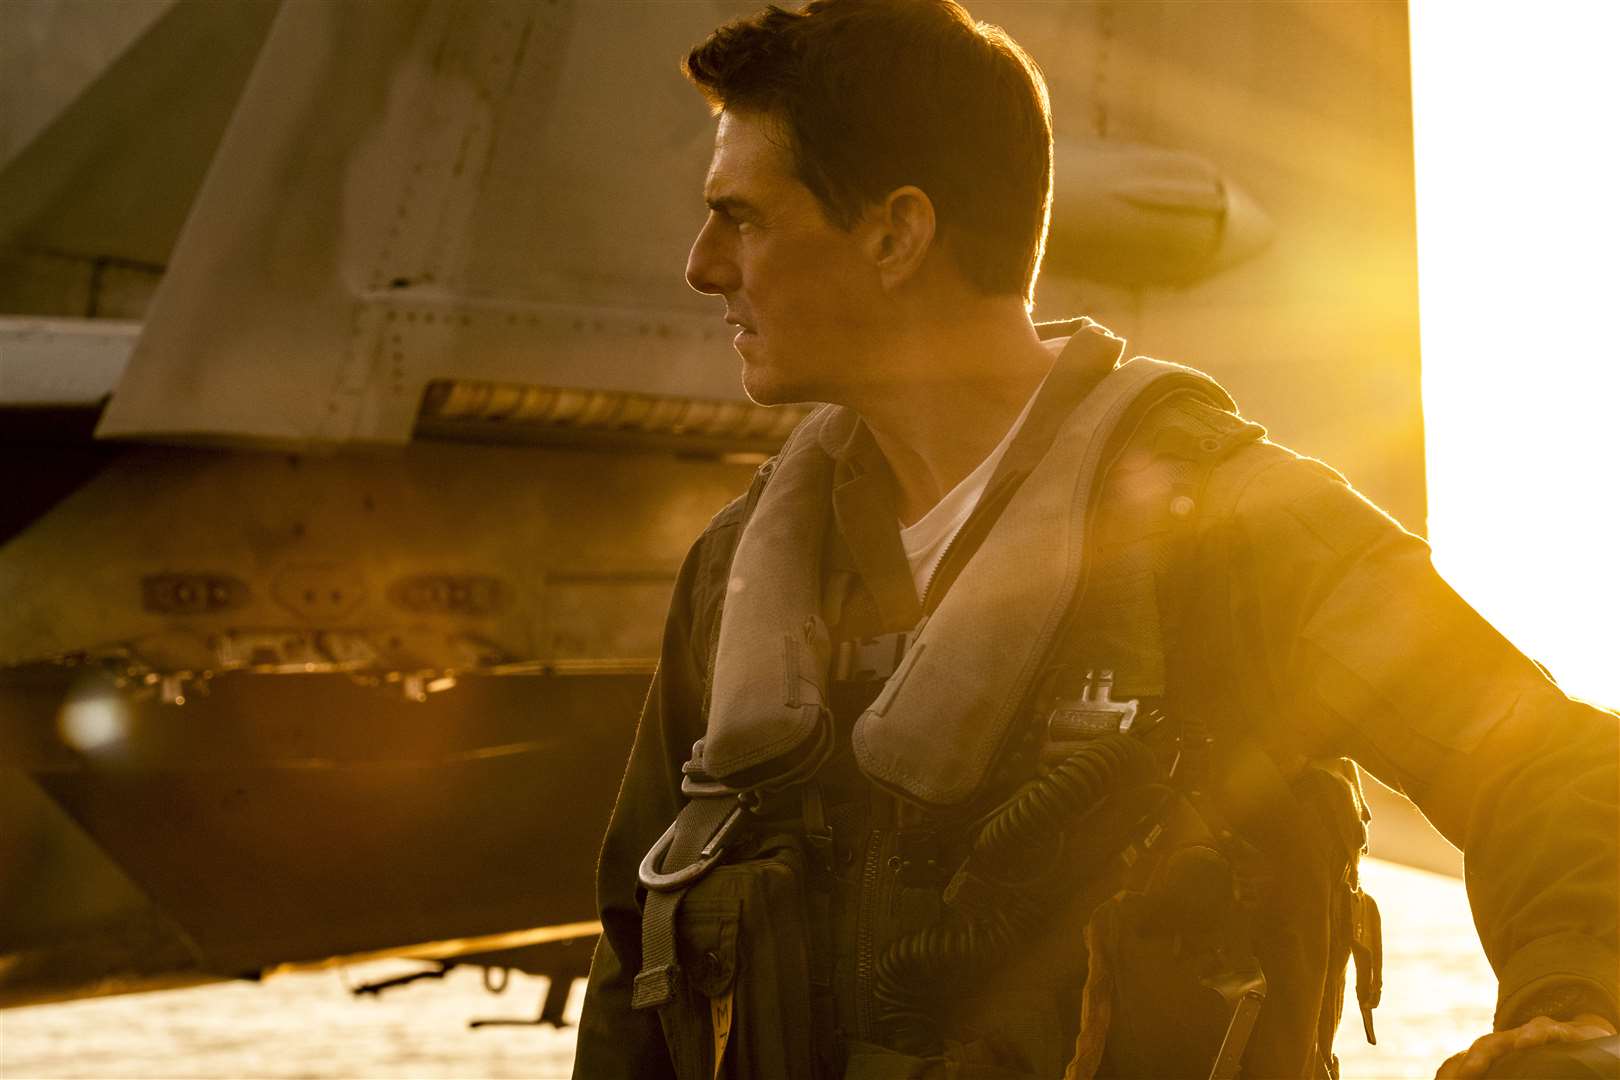 Top Gun: Maverick is one of the summer's big hitters Picture: PA/© 2019 Paramount Pictures Corporation